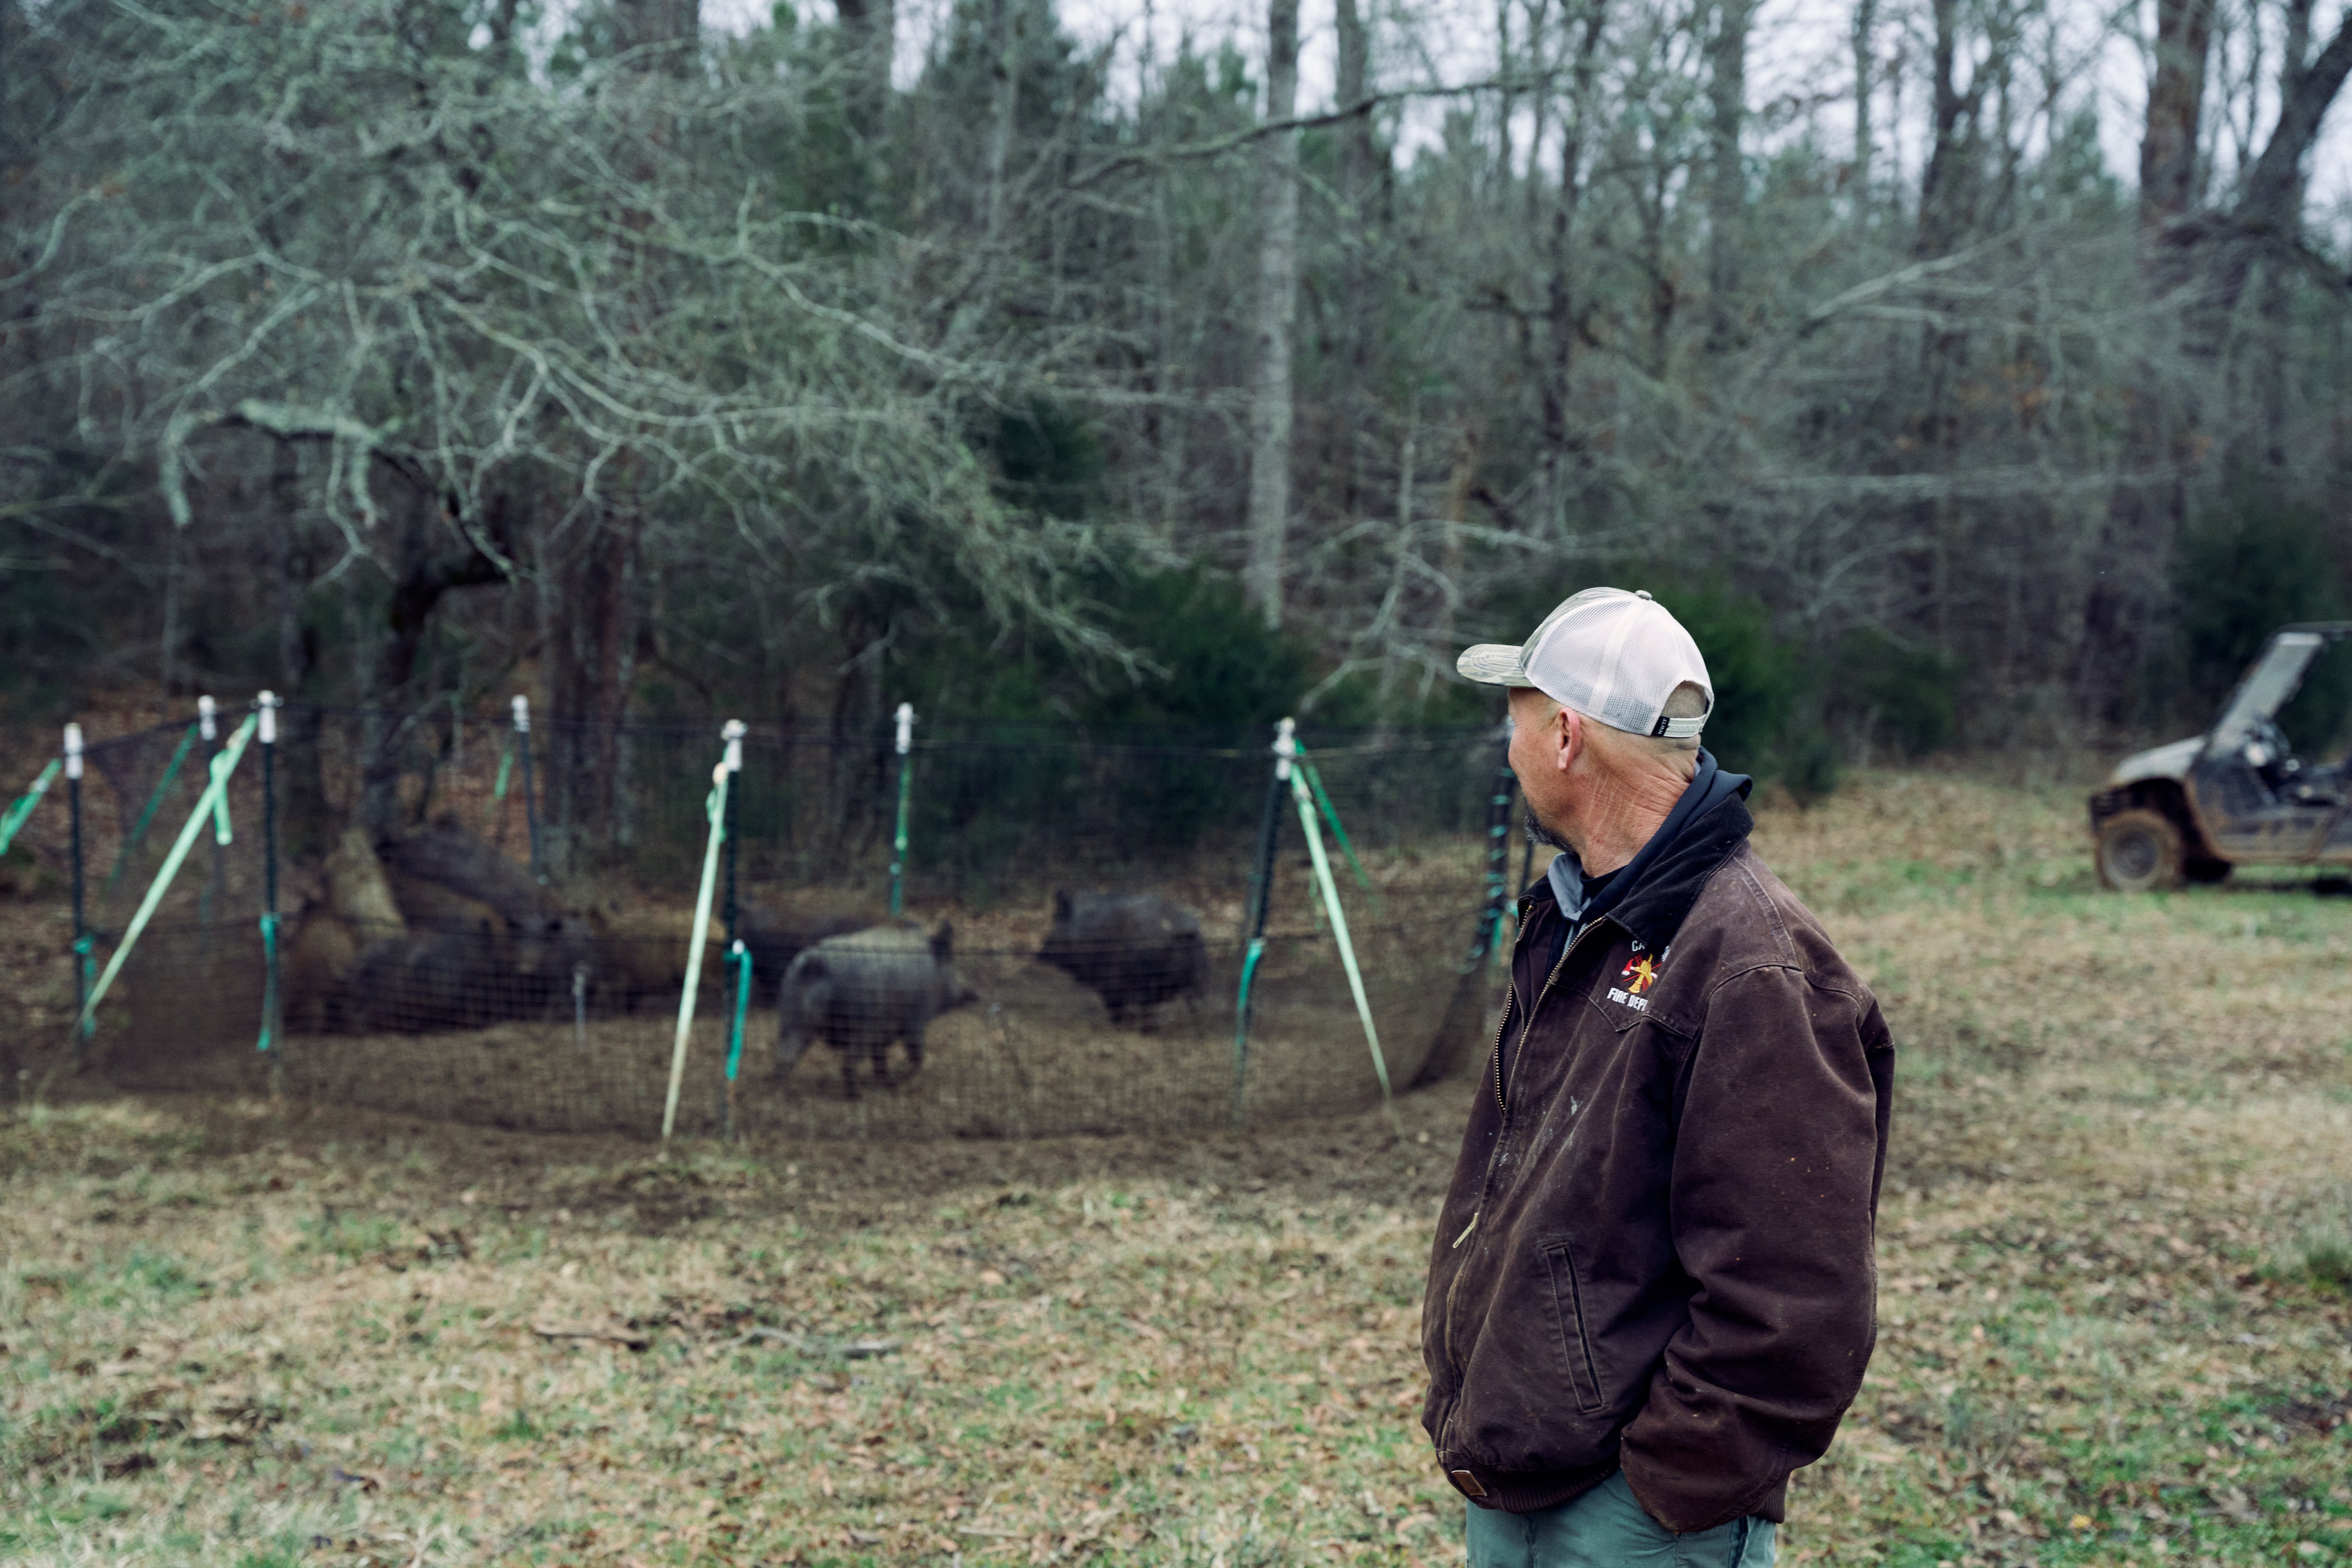 Man looking back at feral pigs caught in a net trap